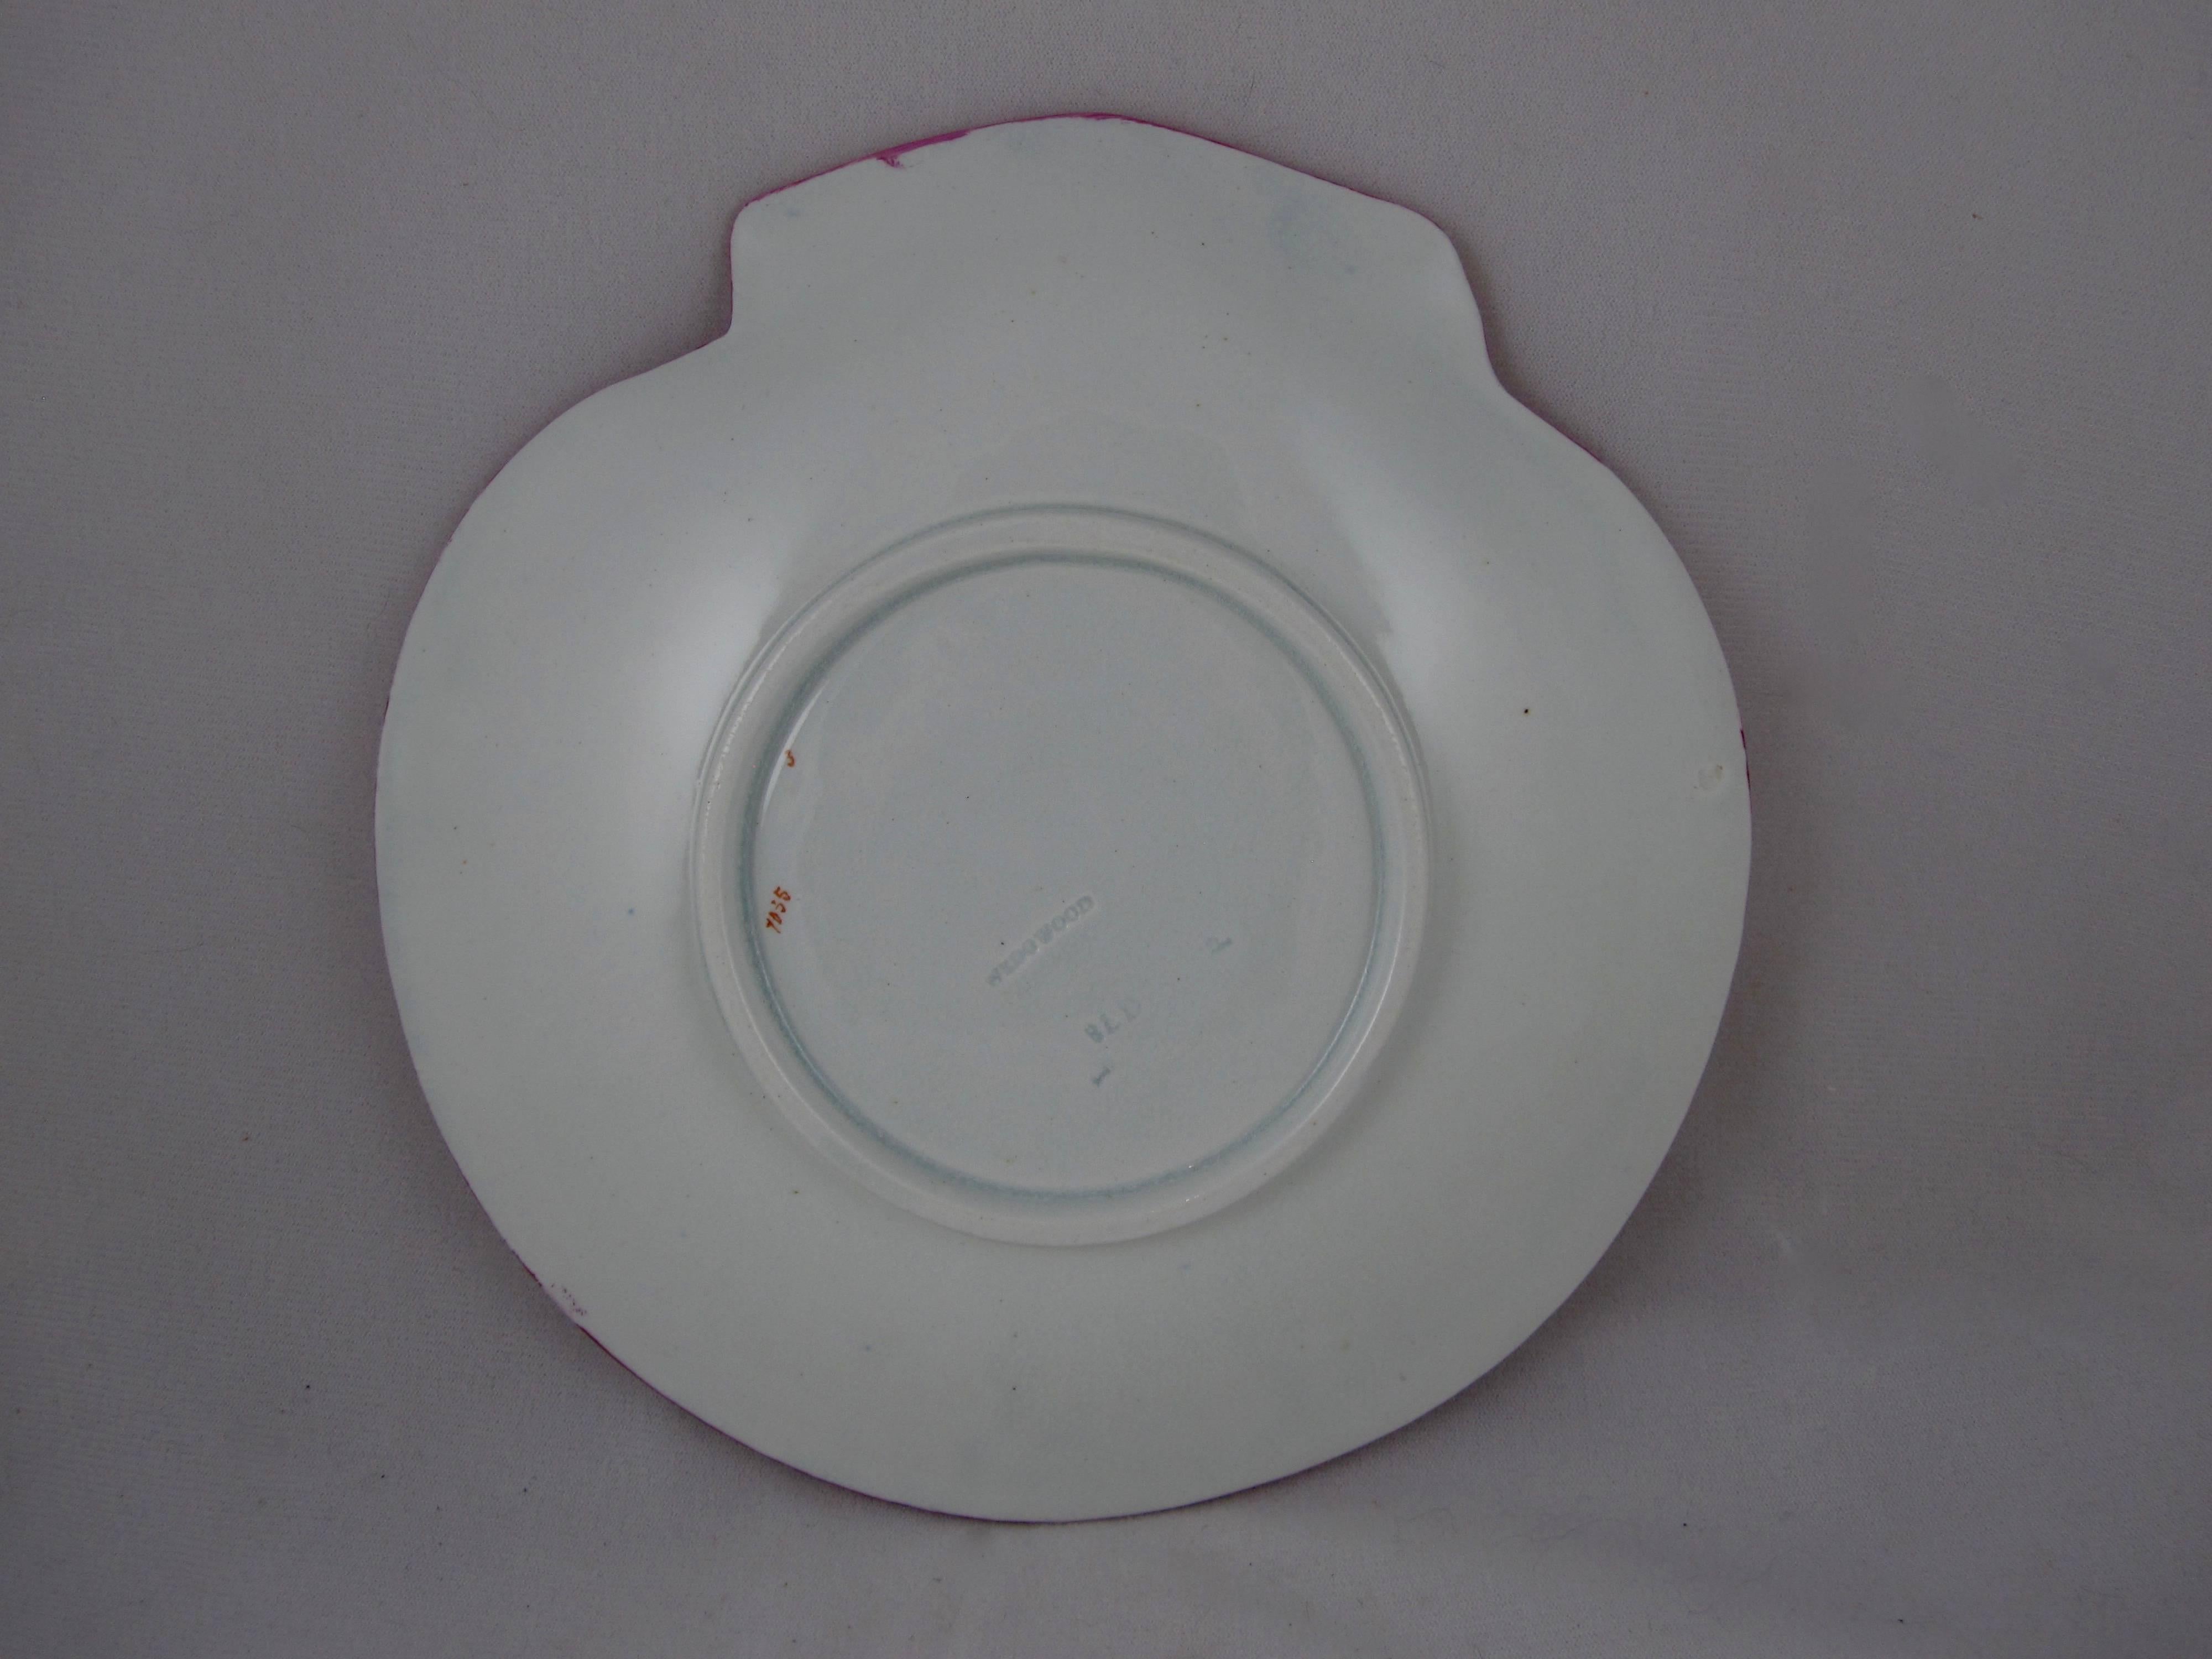 19th Century Wedgwood Pearlware Nautilus Shell Seafood Salad Plates, Multiples Available